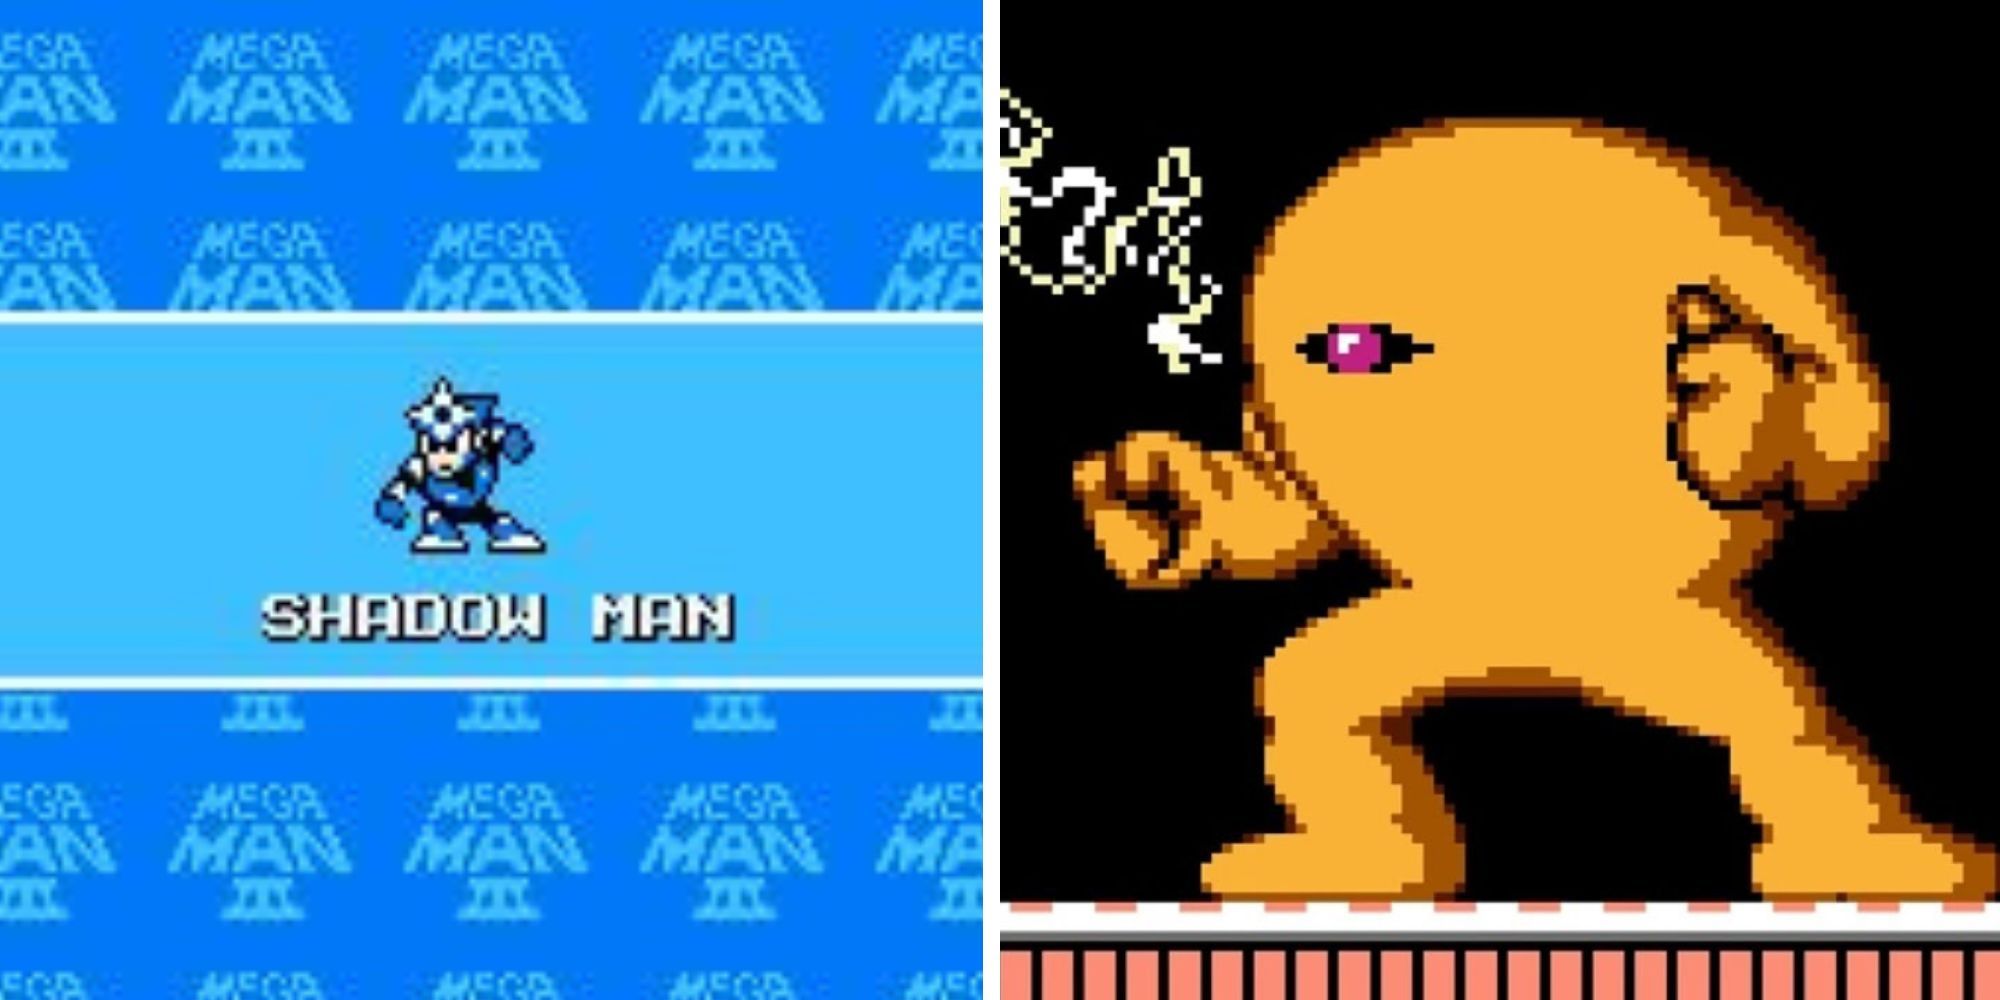 Split Image of Shadow Man and Yellow Devil from the Mega Man Games